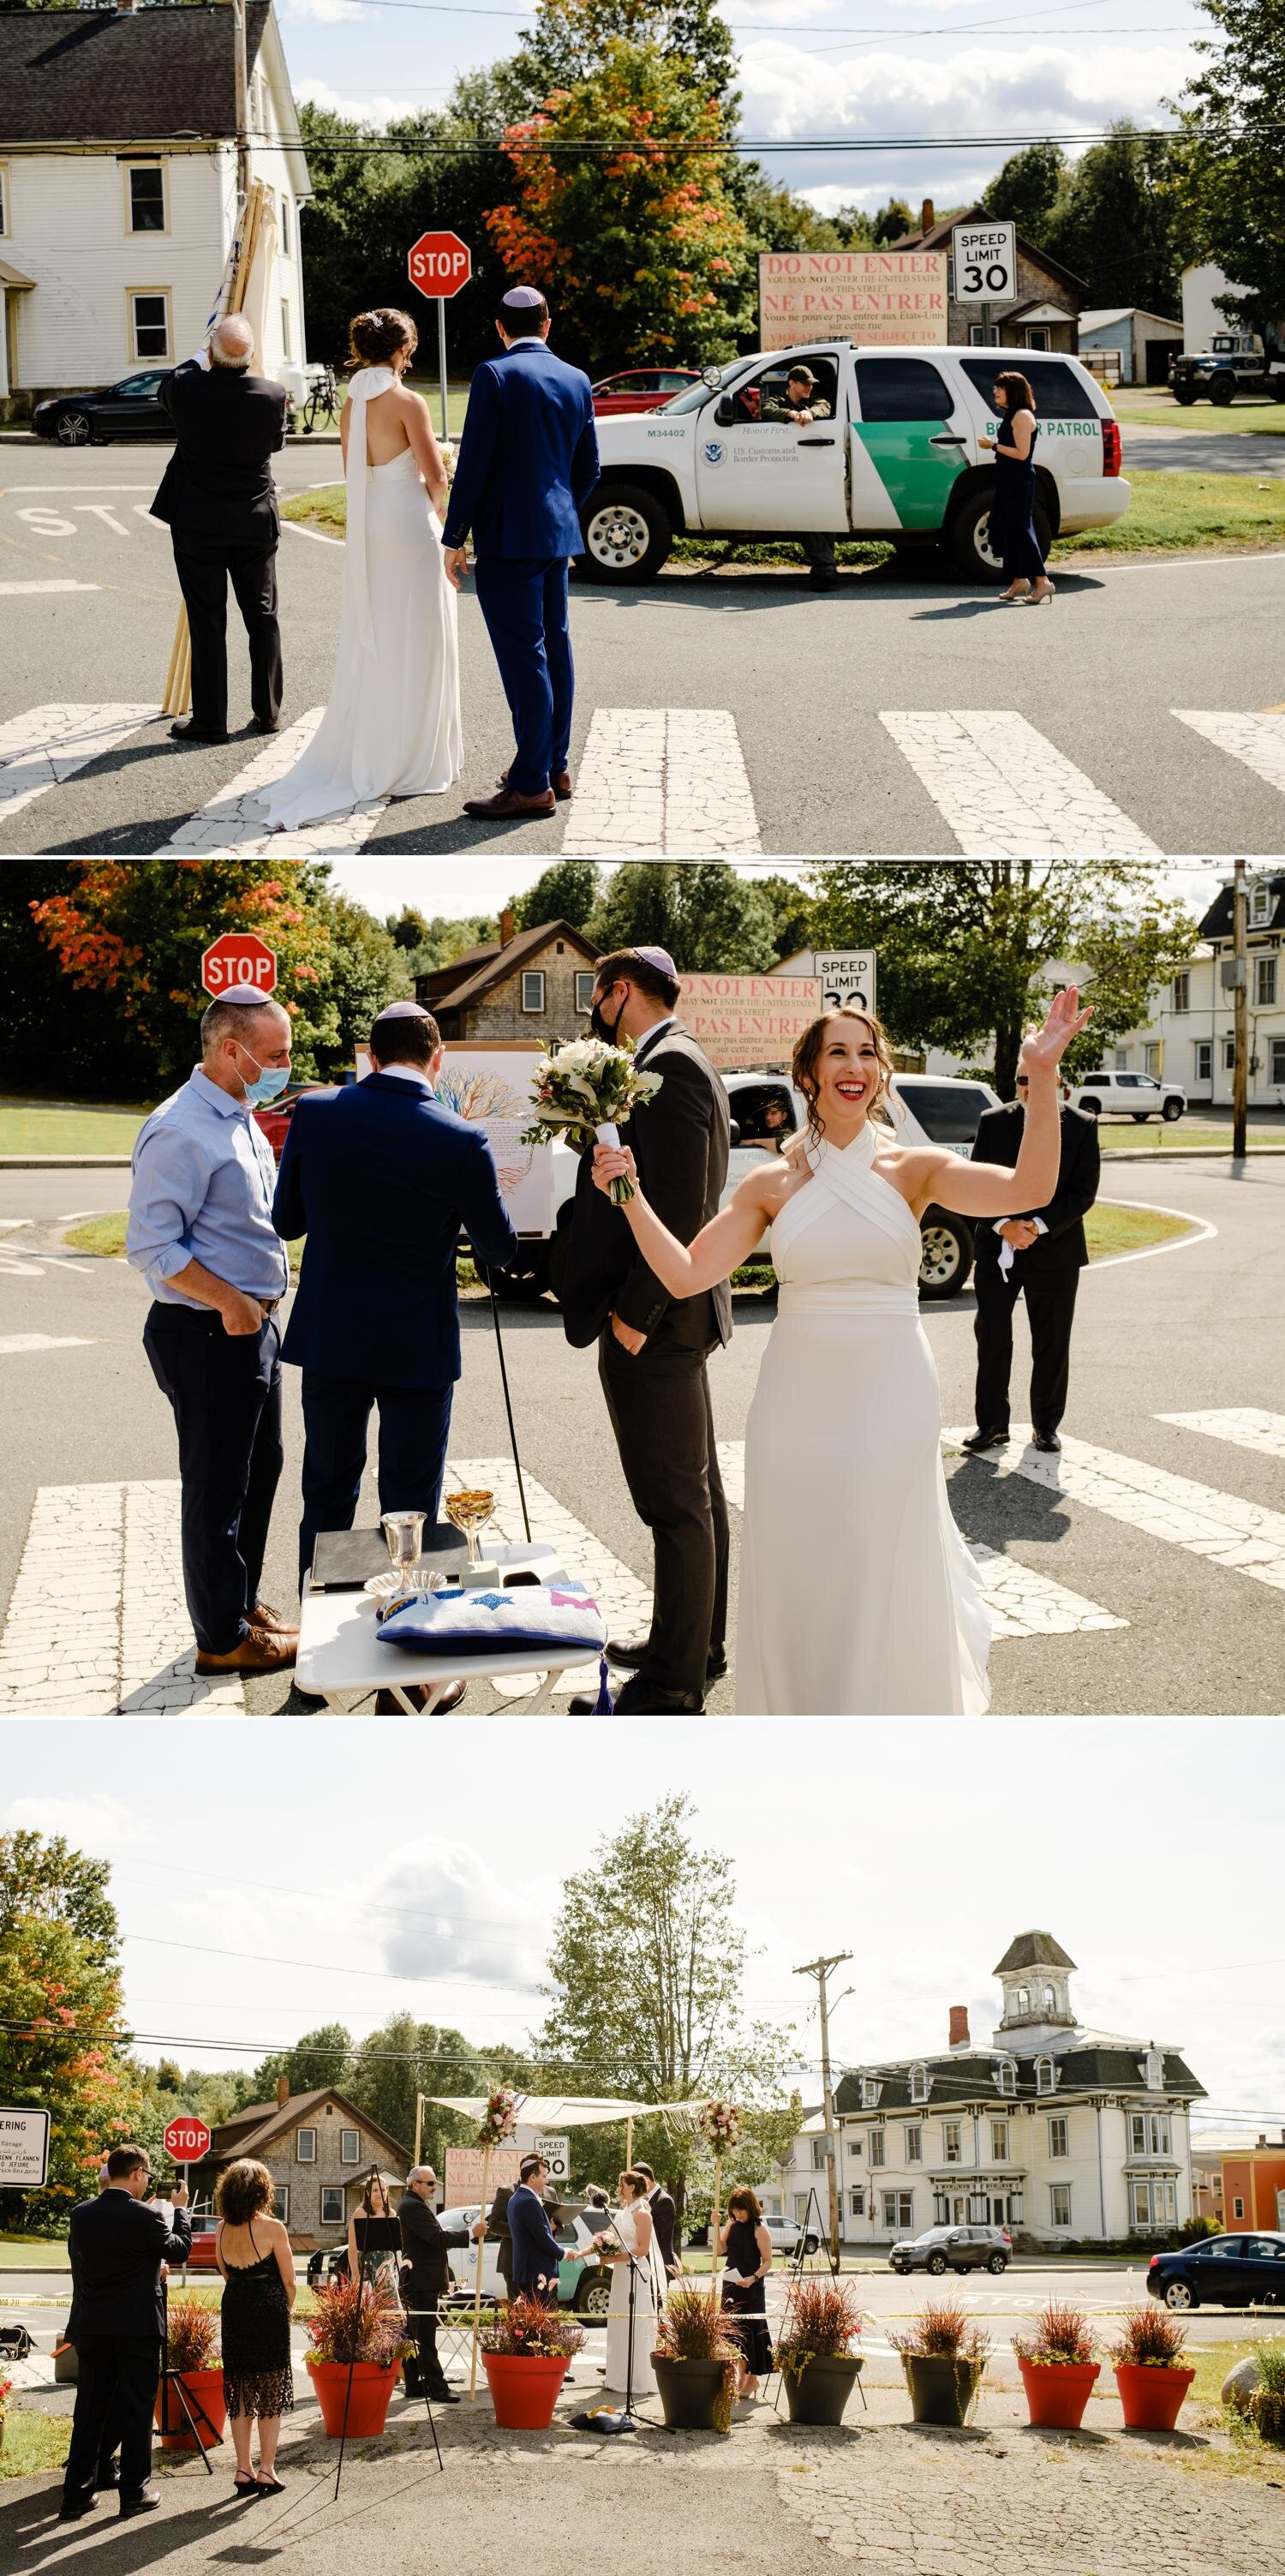 a bride and groom getting married at the Canada - US border